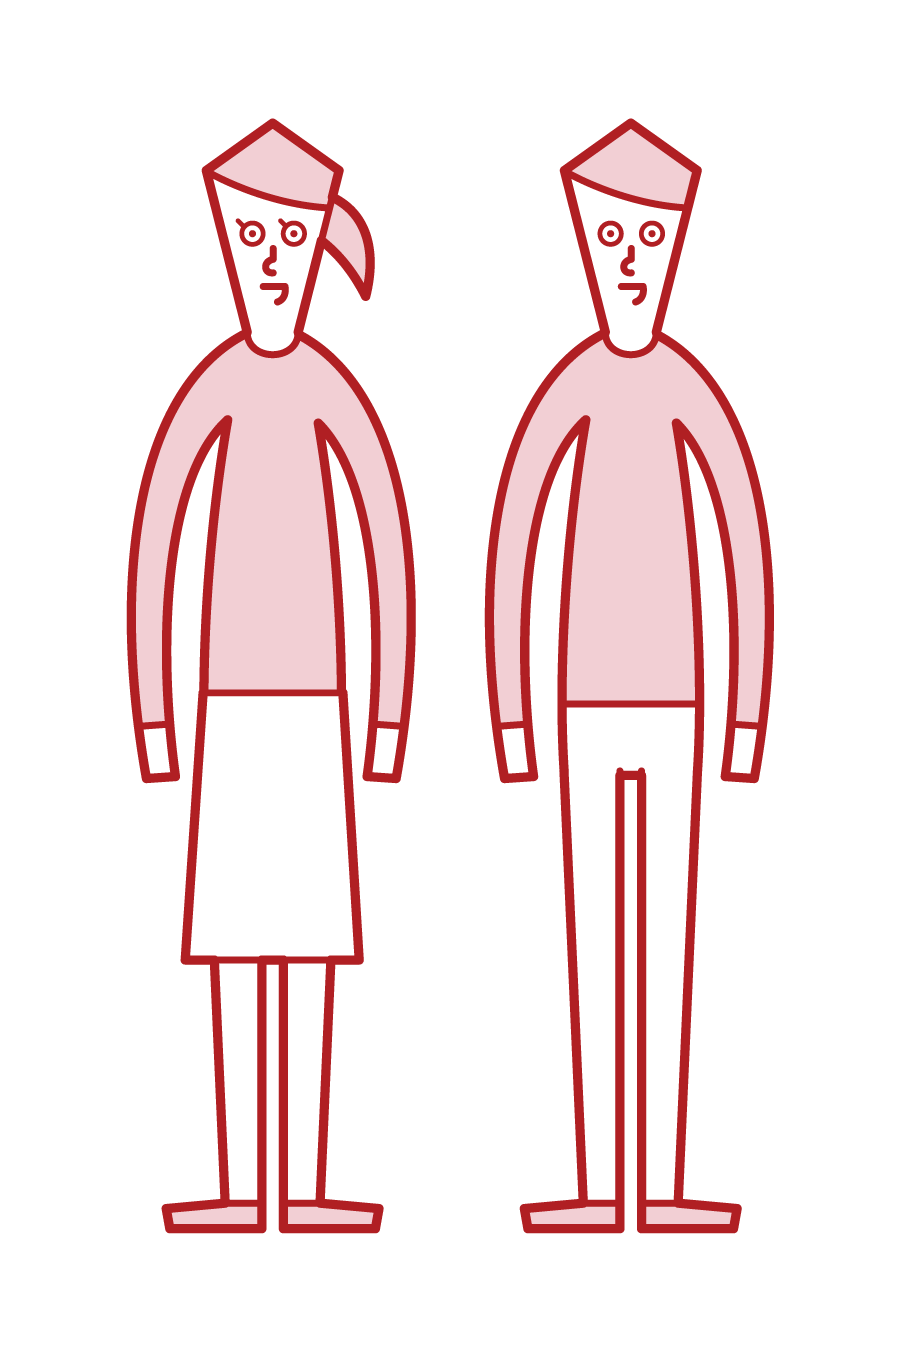 Illustration of a couple standing upright